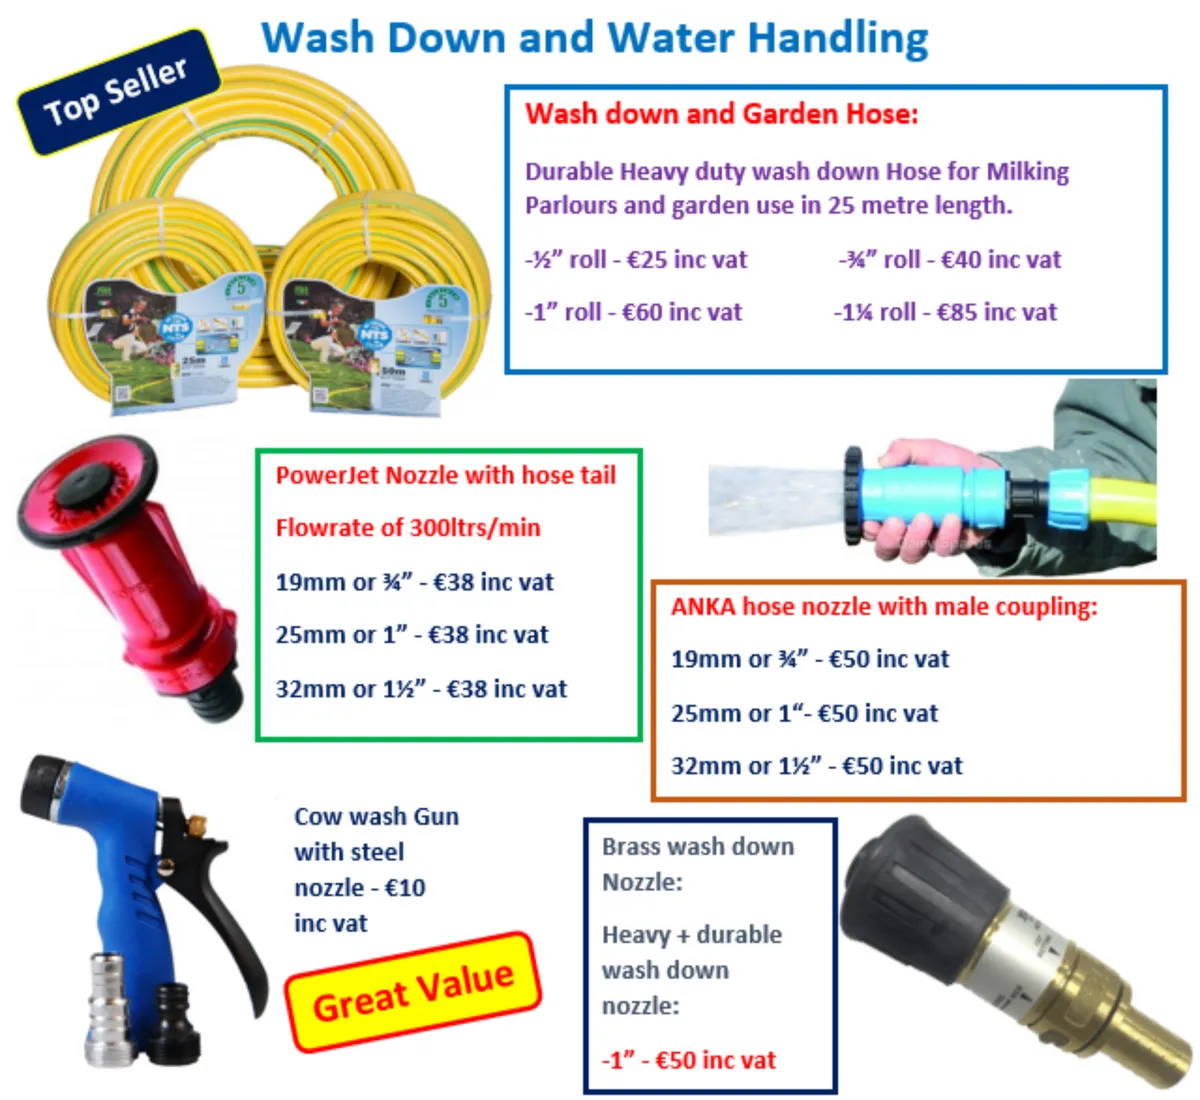 Wash down Hosing, nozzles and accessories for sale - Image 1